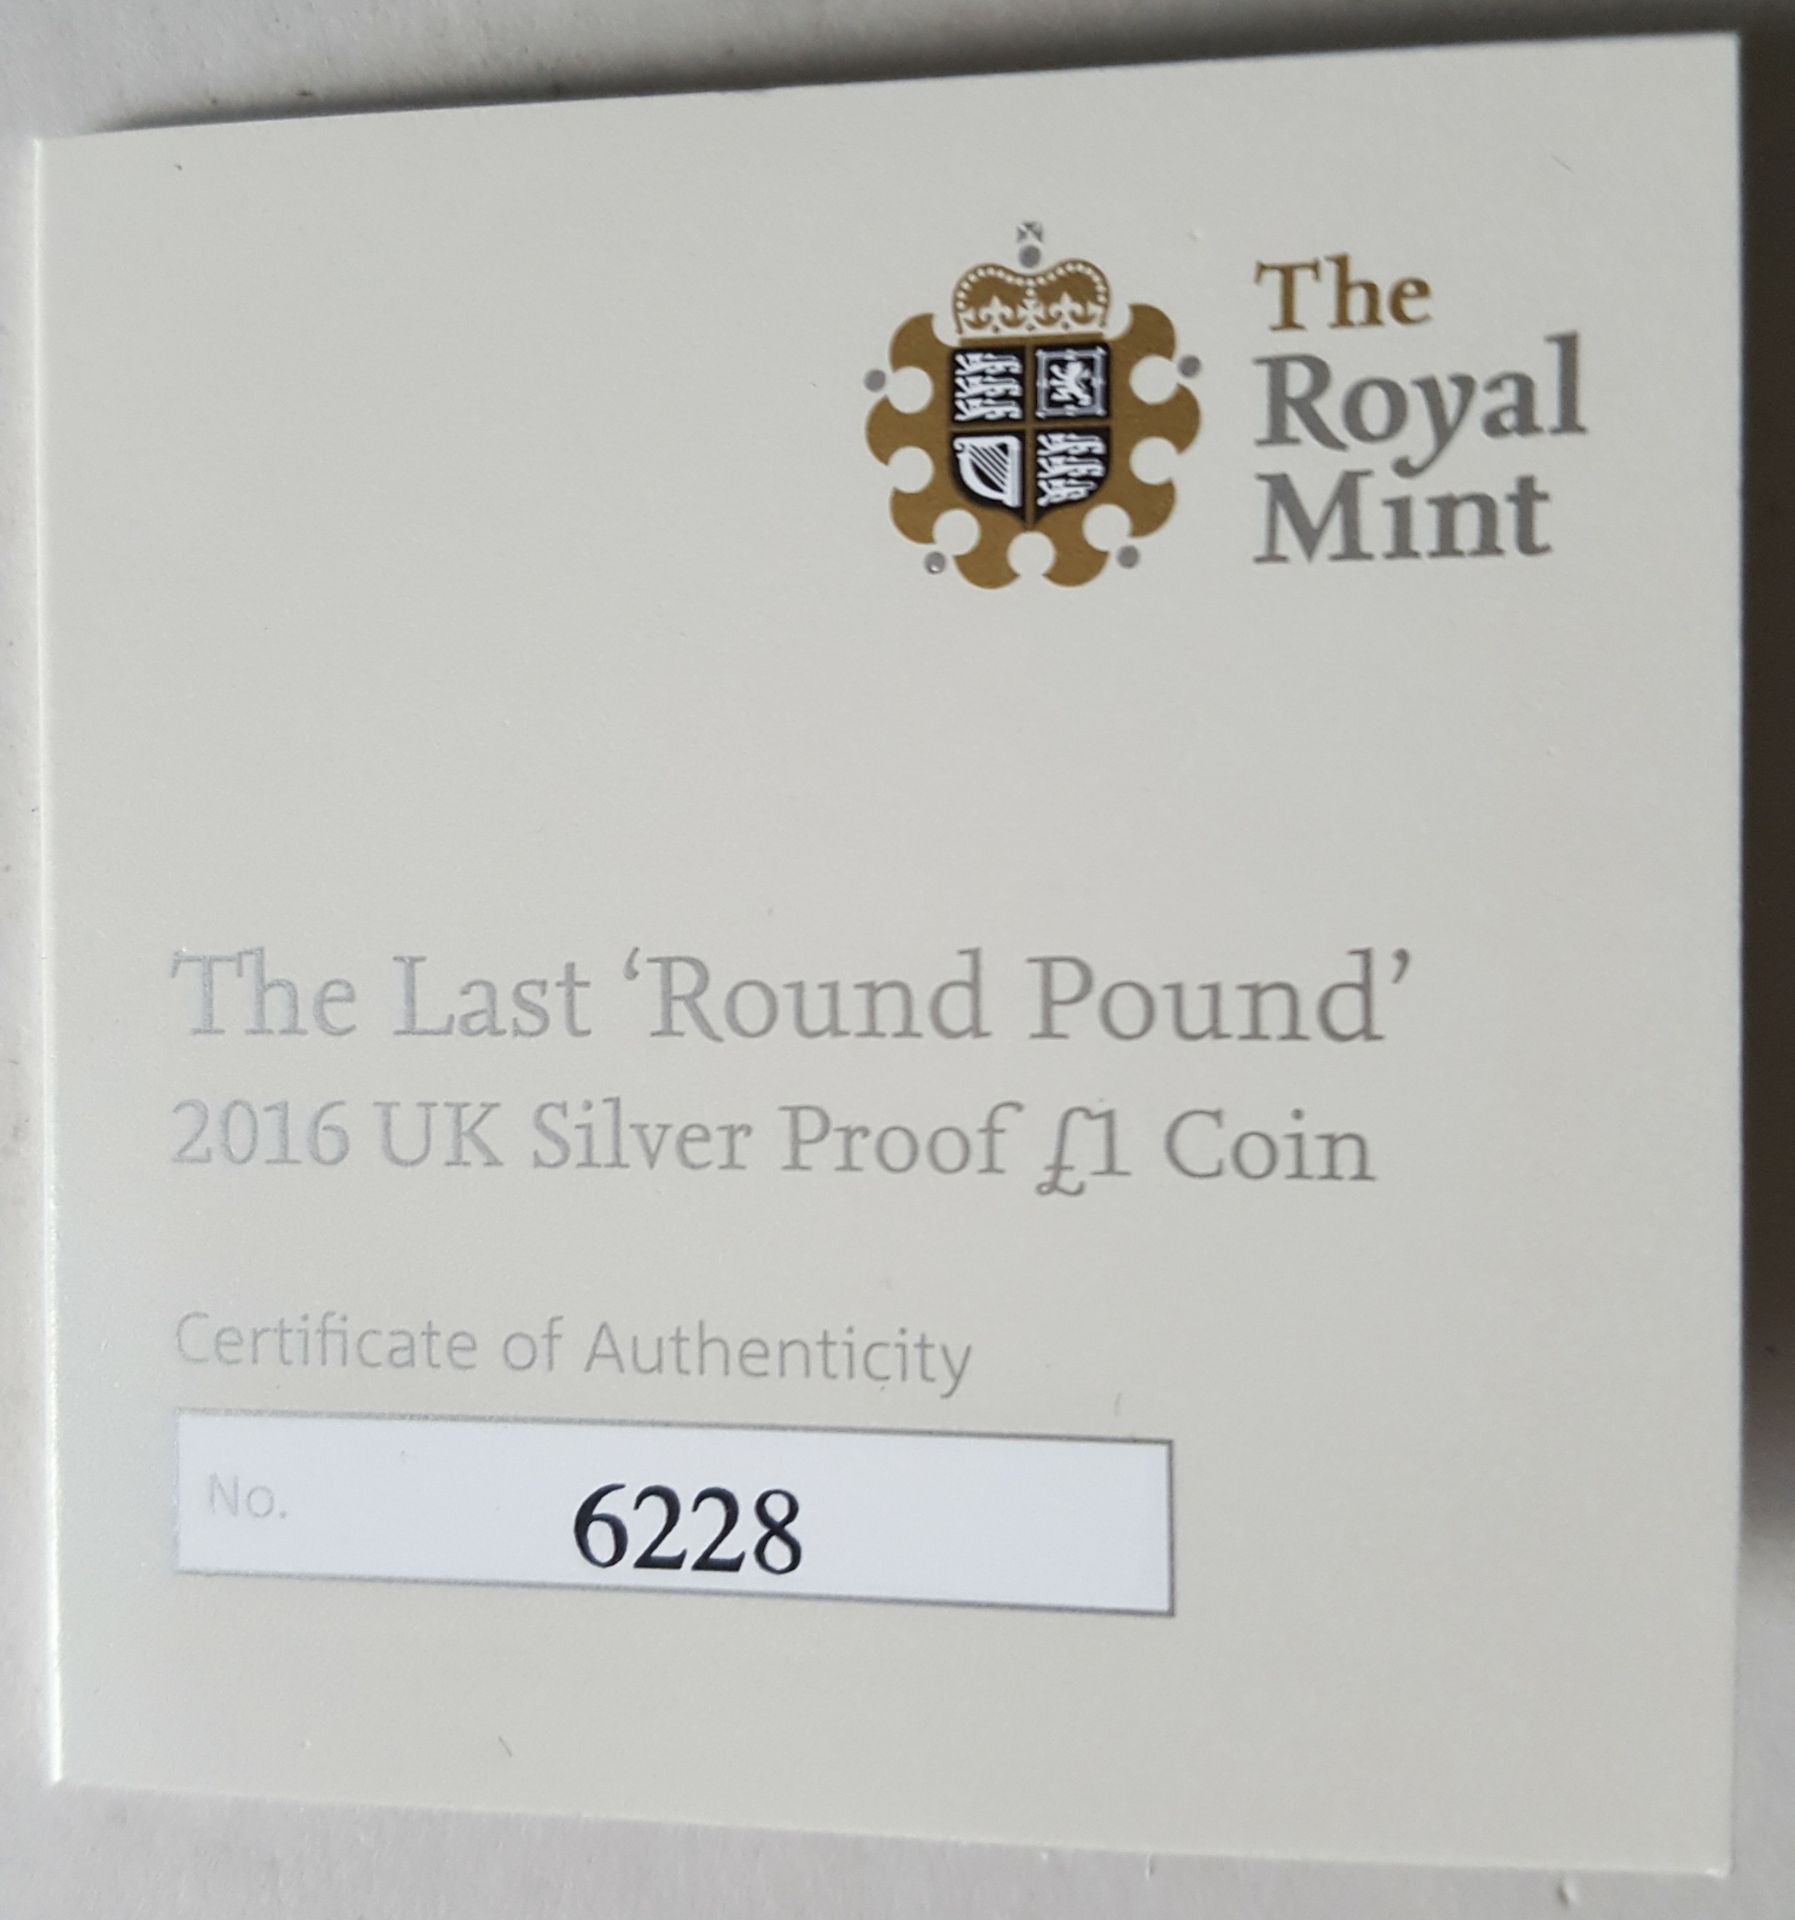 Limited Edition Collectable Coin Silver proof Royal Mint 'The Last Round Pound' - Image 4 of 5